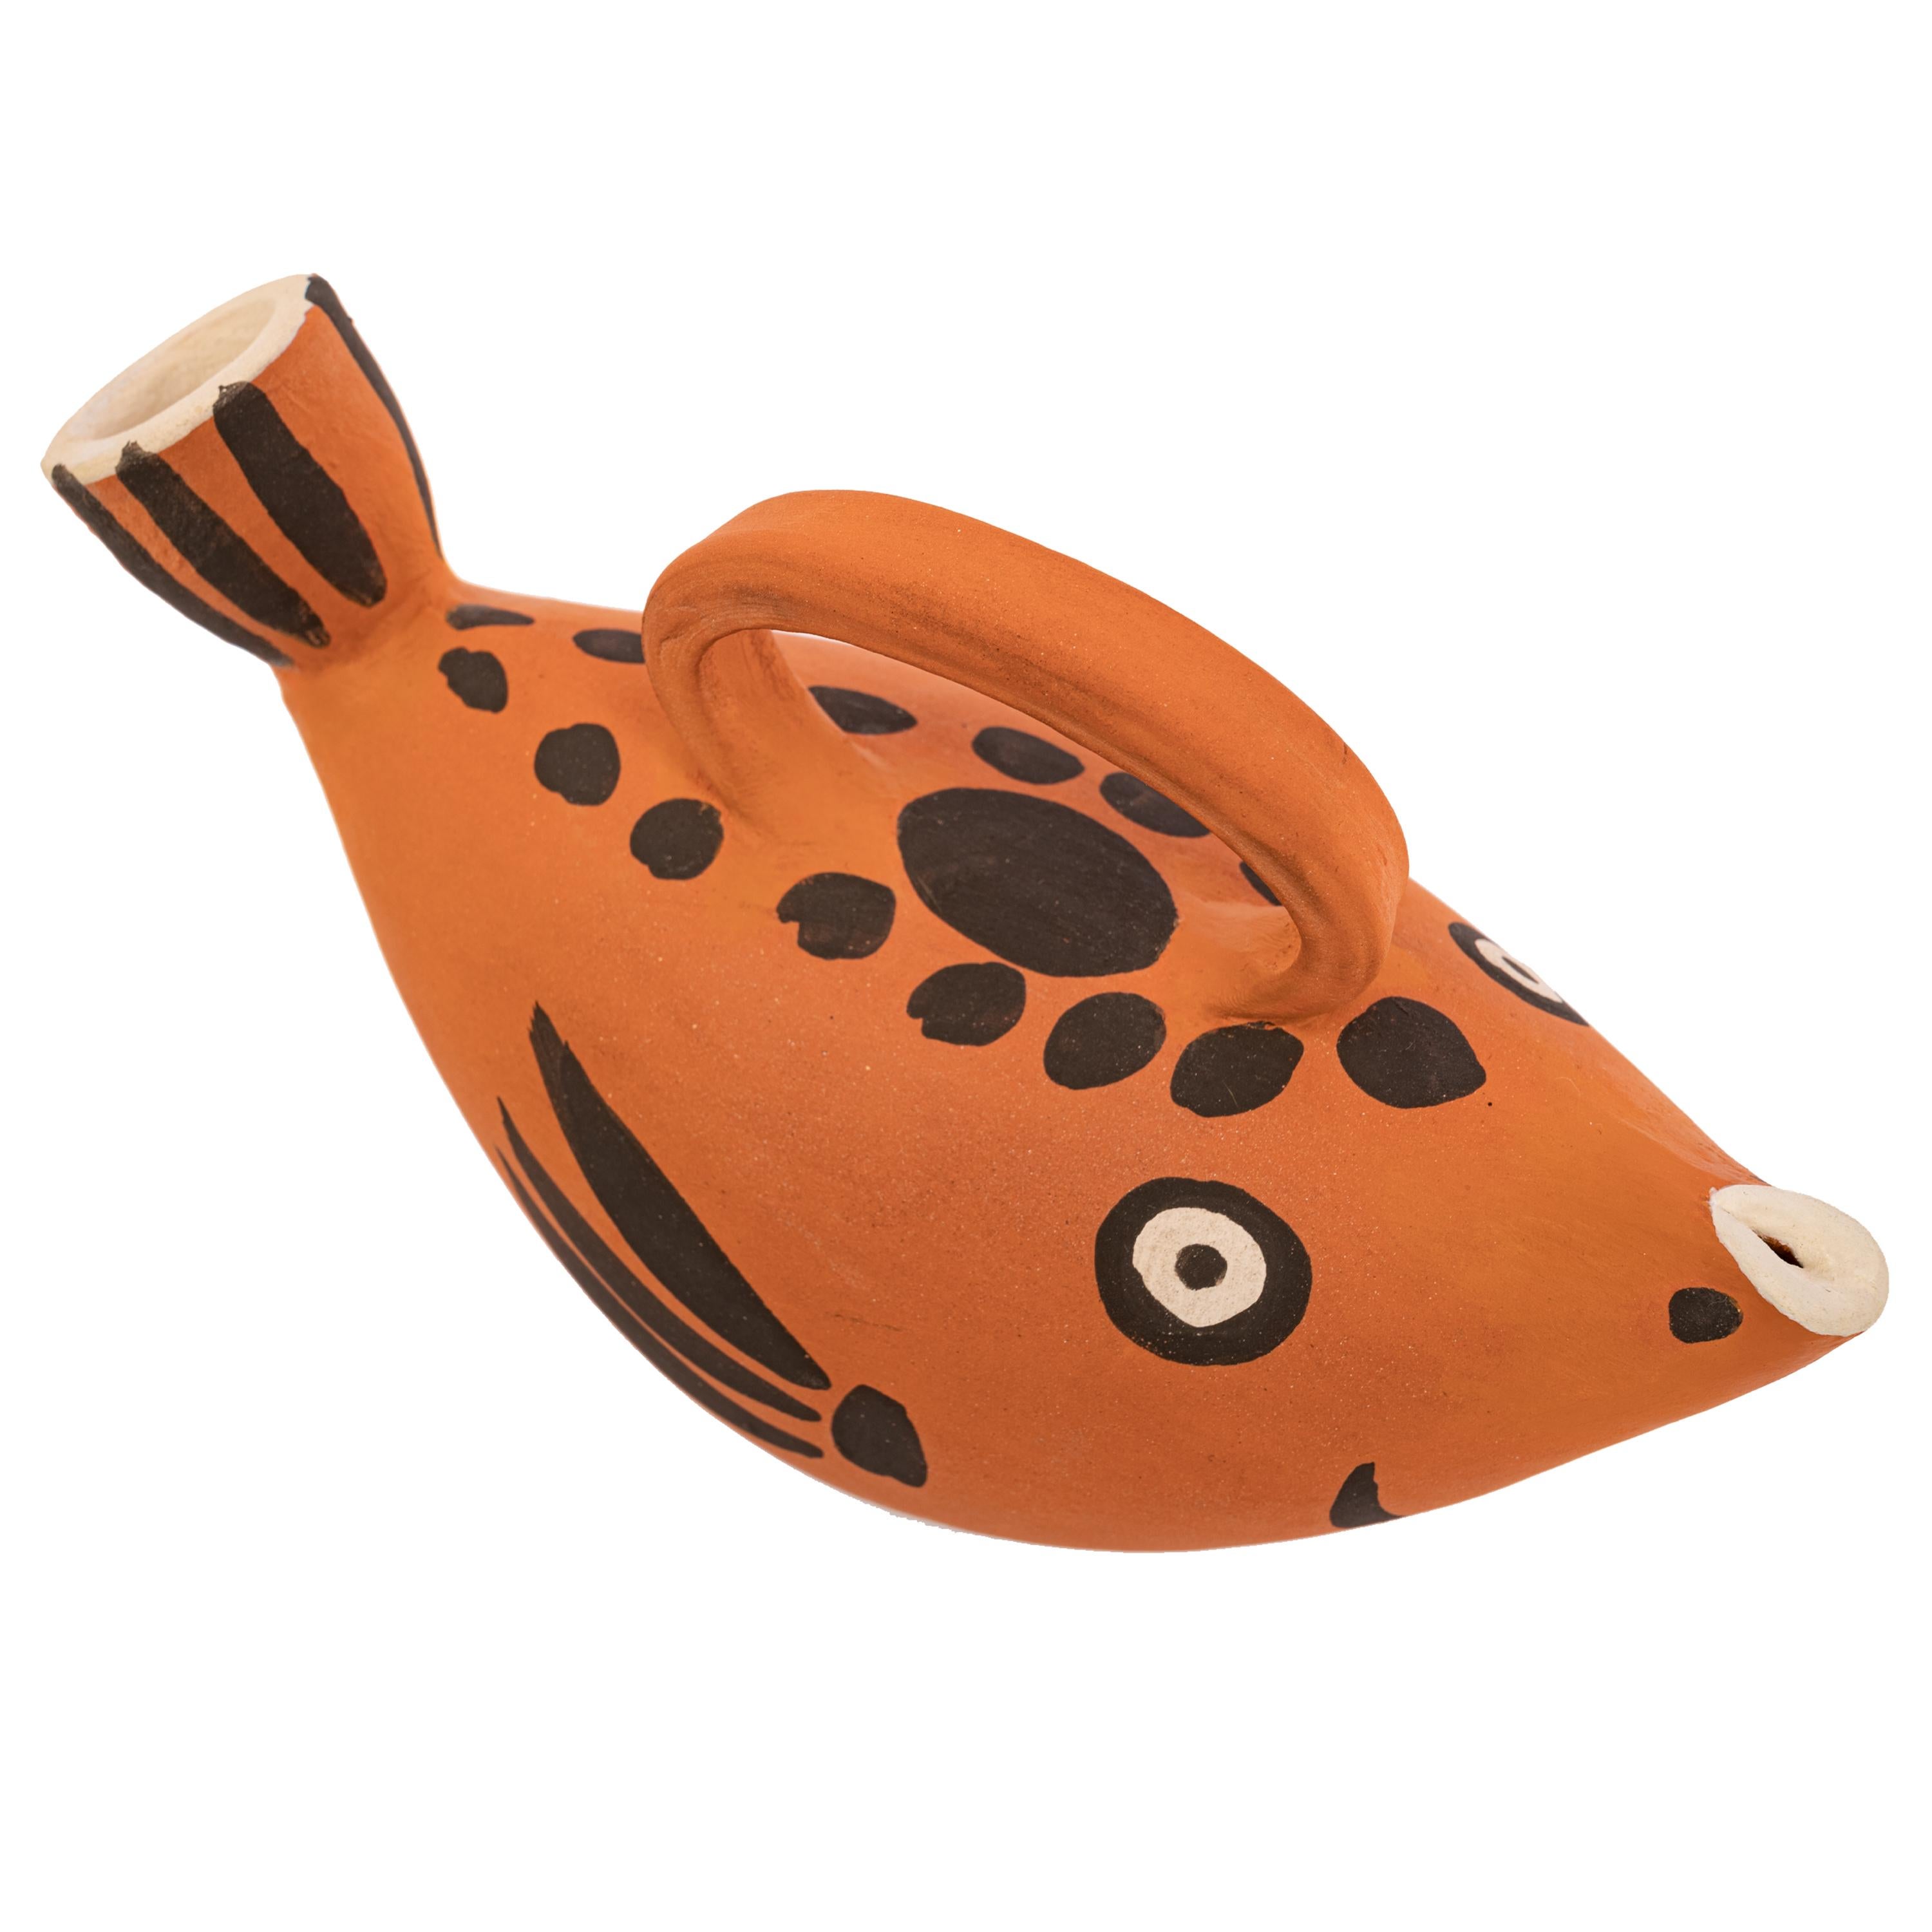 Pablo Picasso Terracotta Fish Pitcher Madoura Pottery Sujet Poisson France 1952  For Sale 1